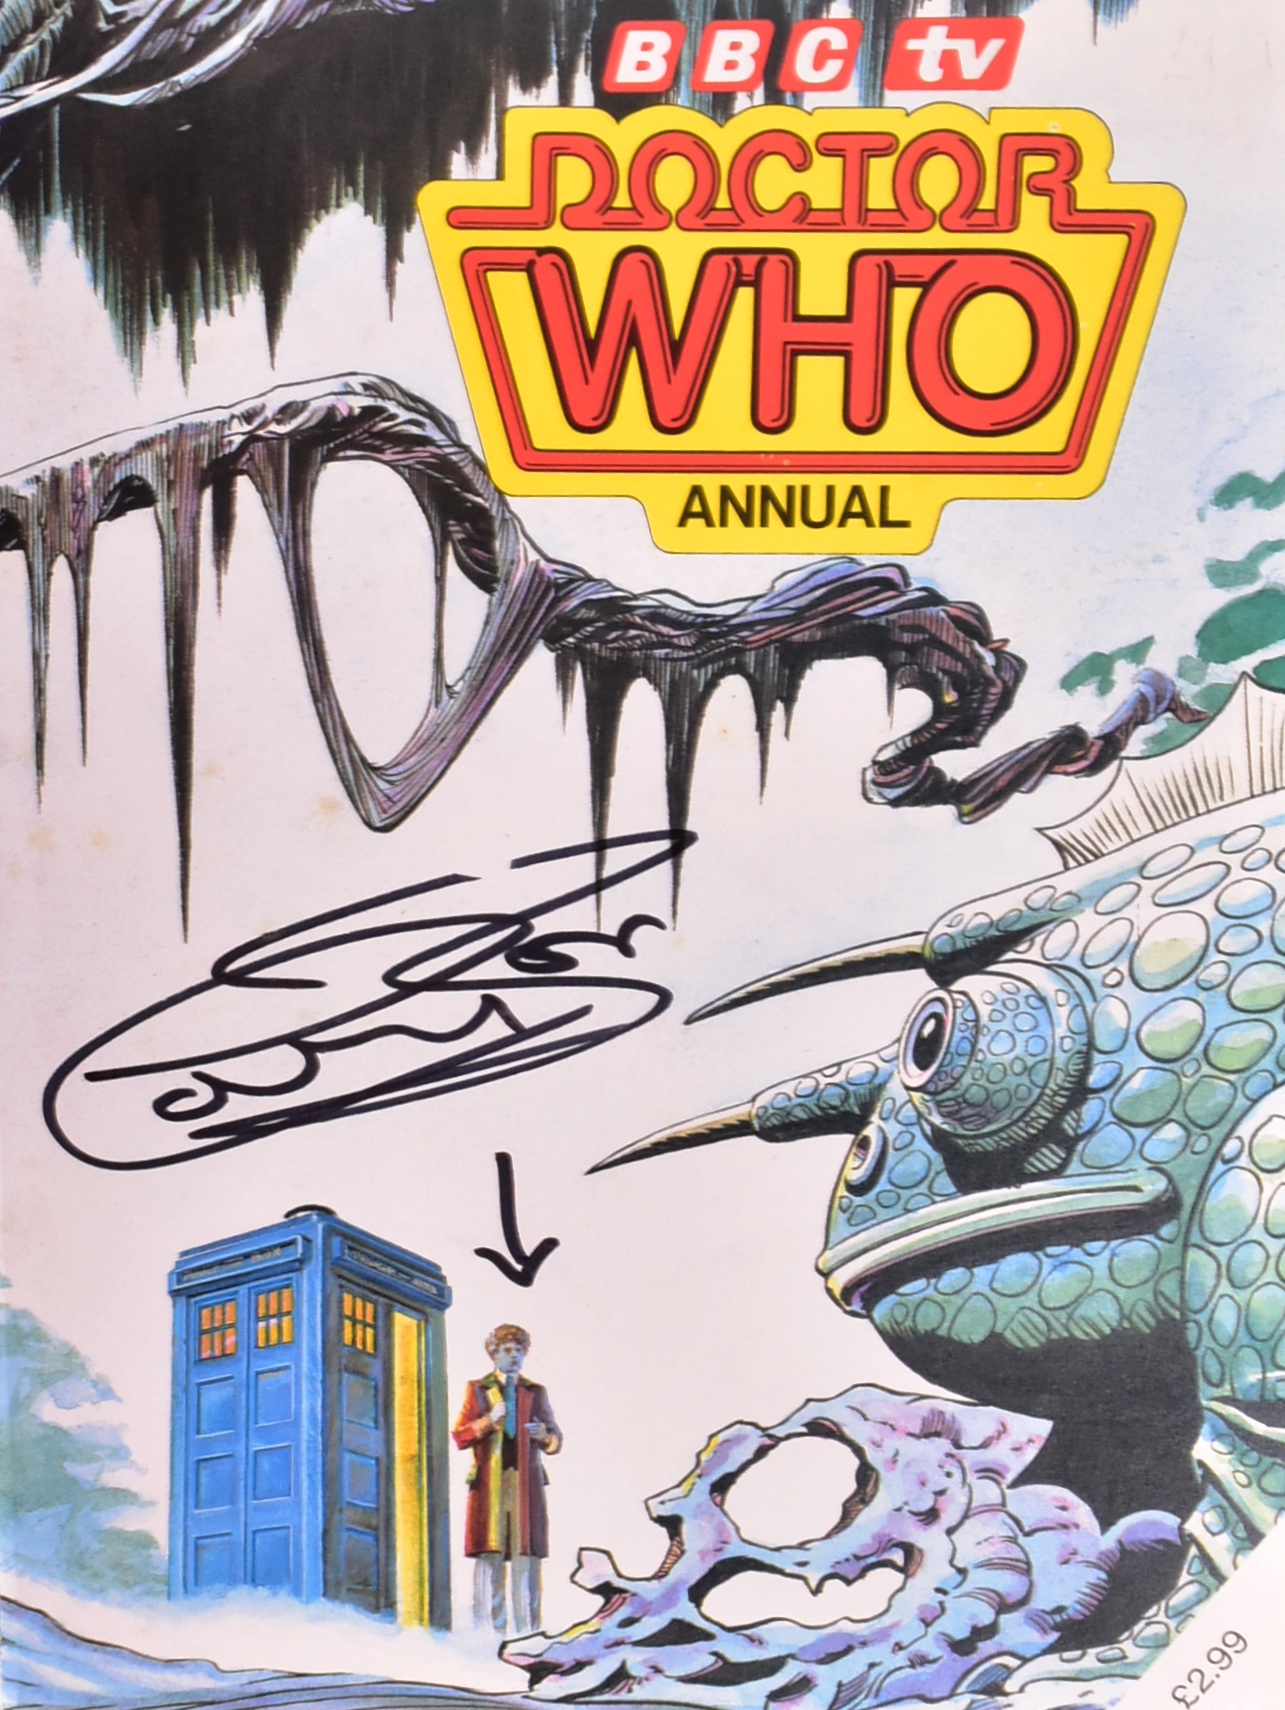 DOCTOR WHO - COLIN BAKER (SIXTH DOCTOR) - SIGNED ANNUALS - Image 4 of 5